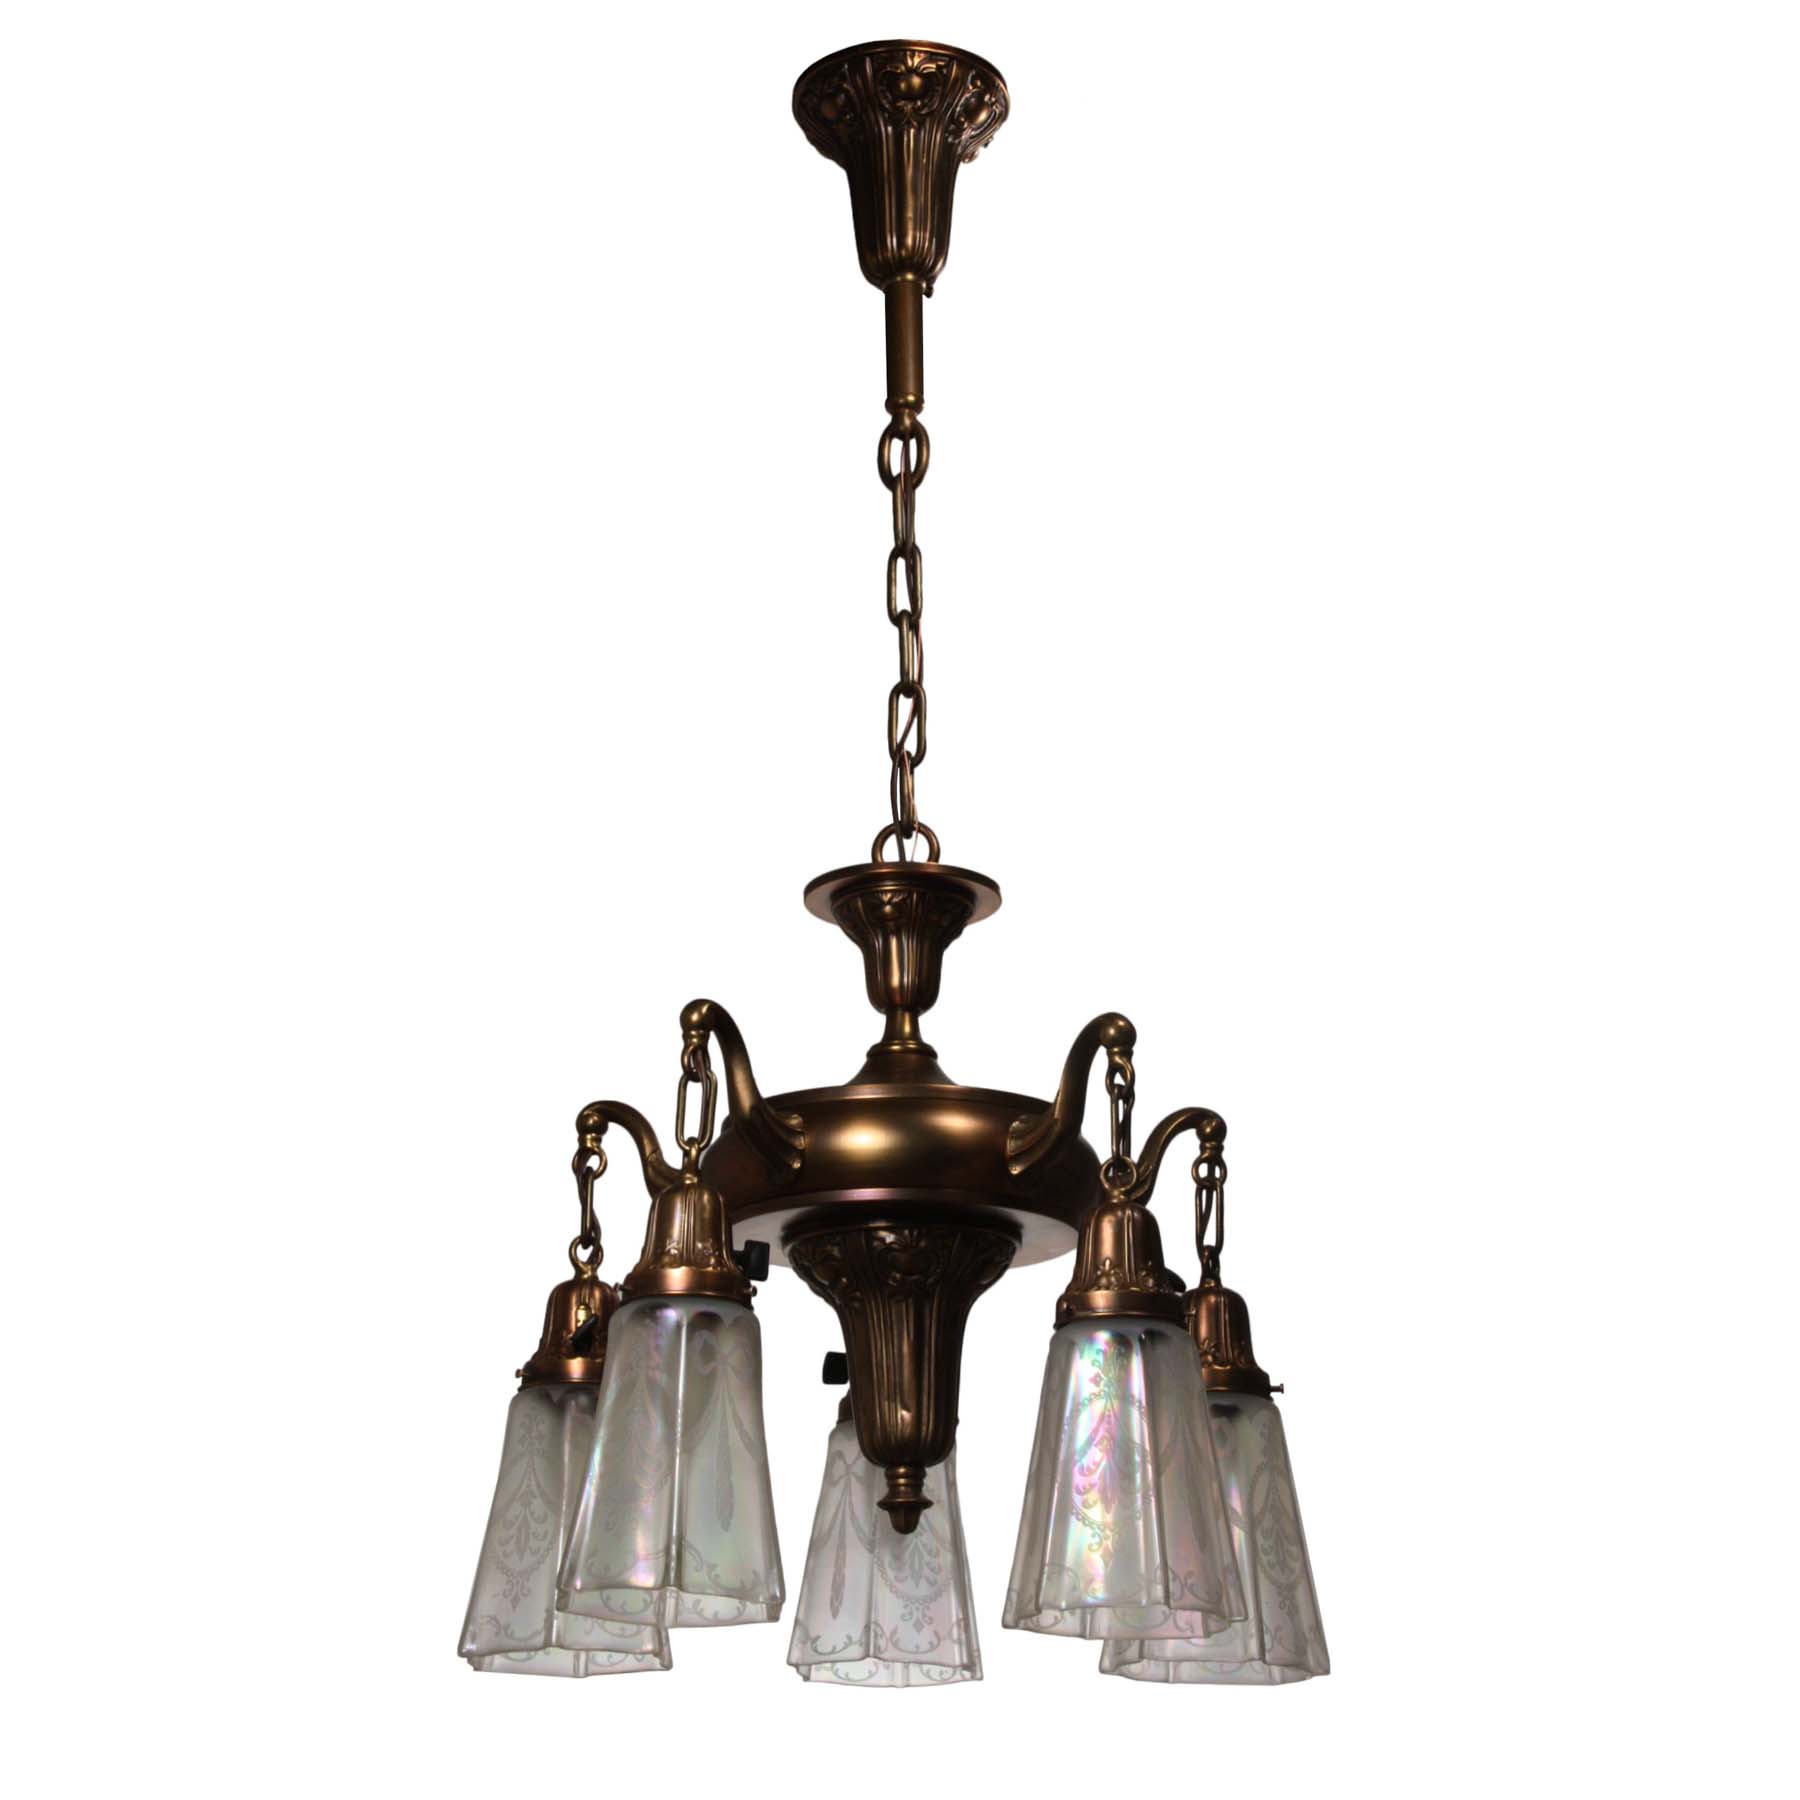 SOLD Antique Neoclassical Chandelier with Original Opalescent Shades-56892